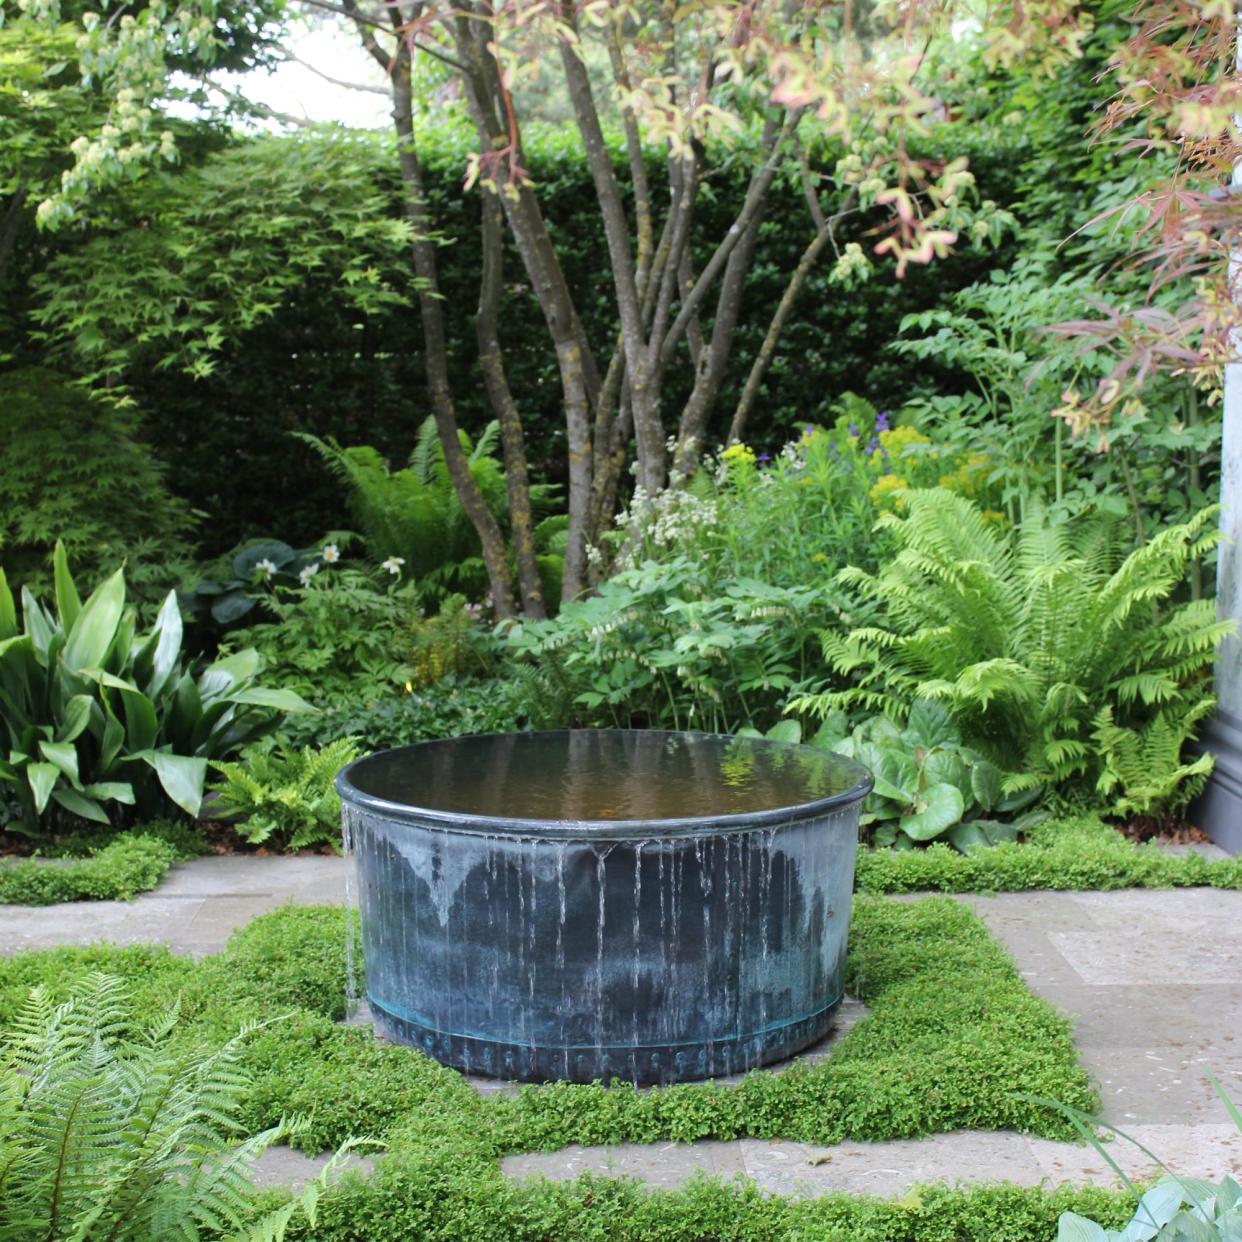  A black water tub feature at RHS Chelsea Flower Show. 